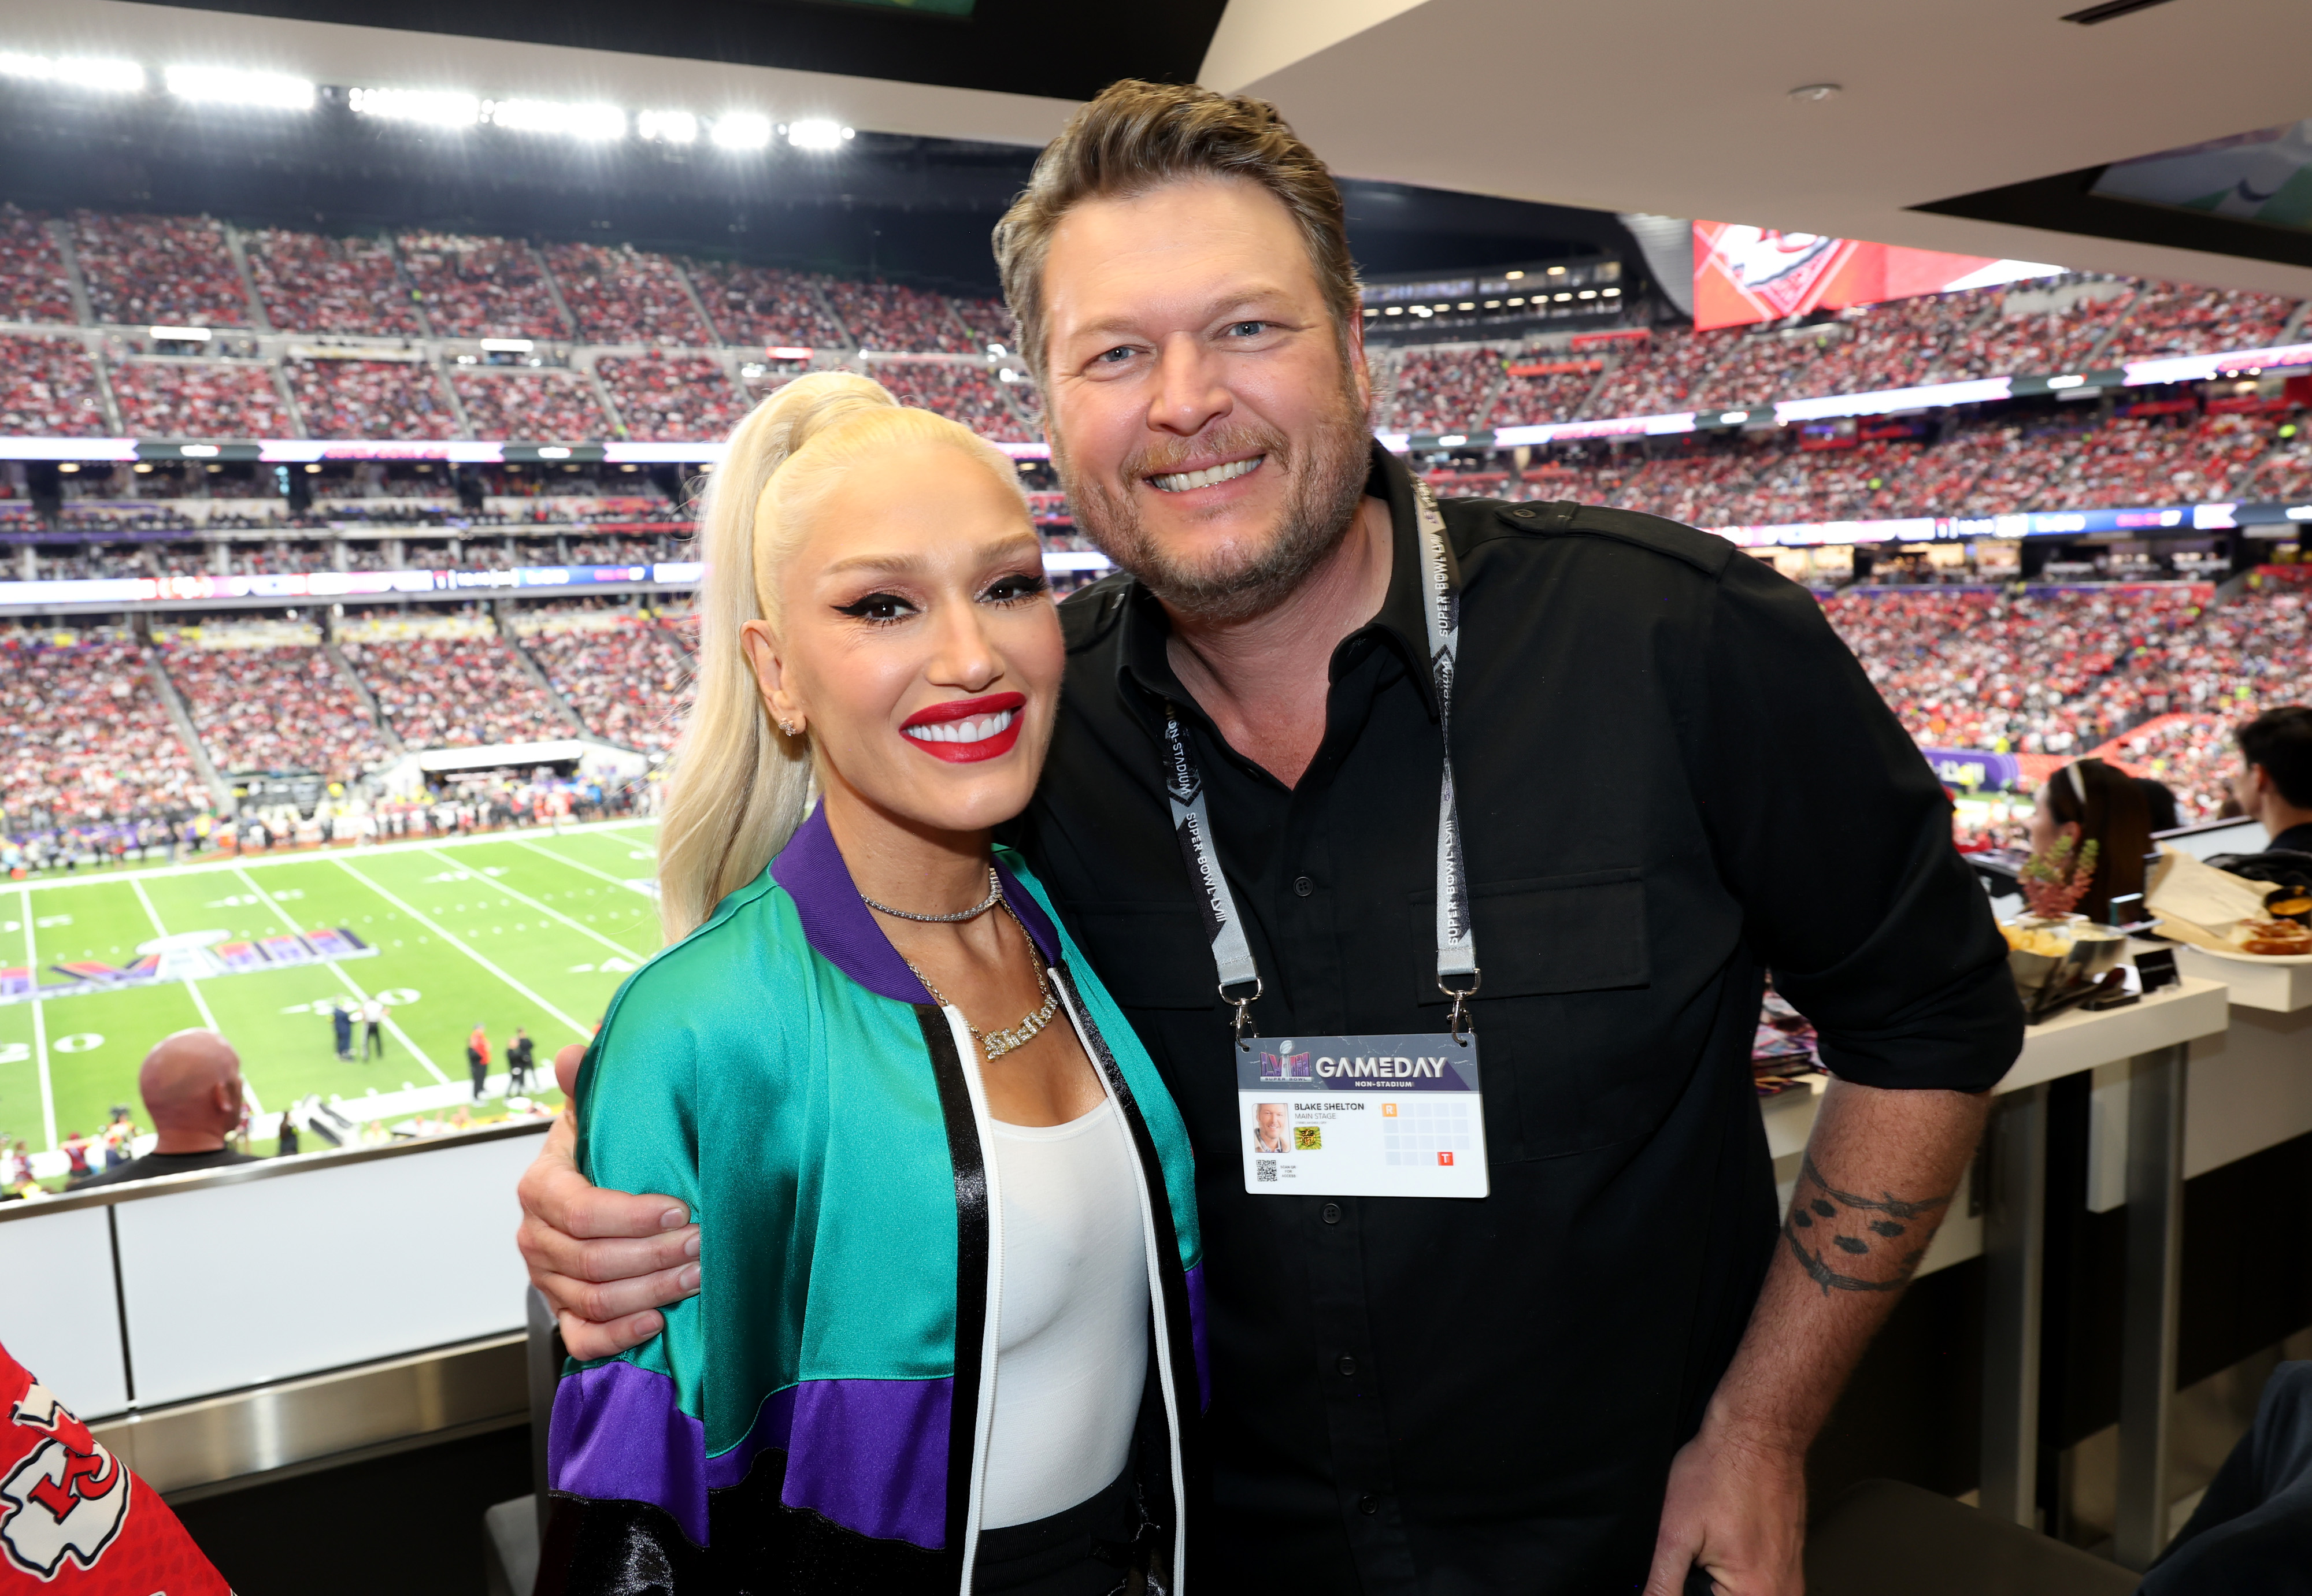 Blake reunited with his wife, Gwen Stefani, after concluding his Back To The Honky Tonk Tour